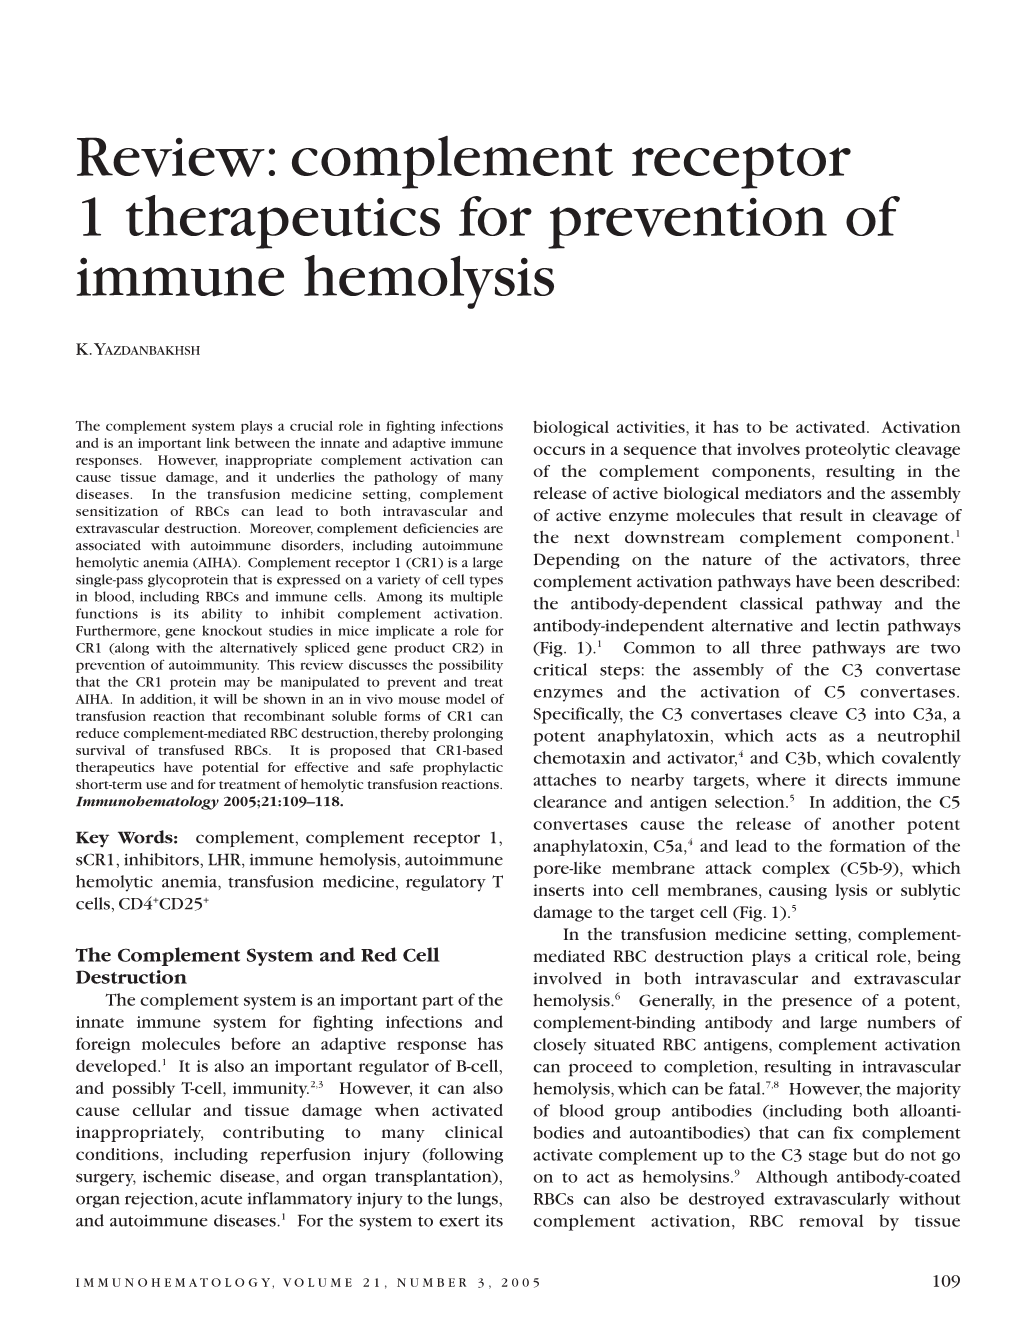 Complement Receptor 1 Therapeutics for Prevention of Immune Hemolysis